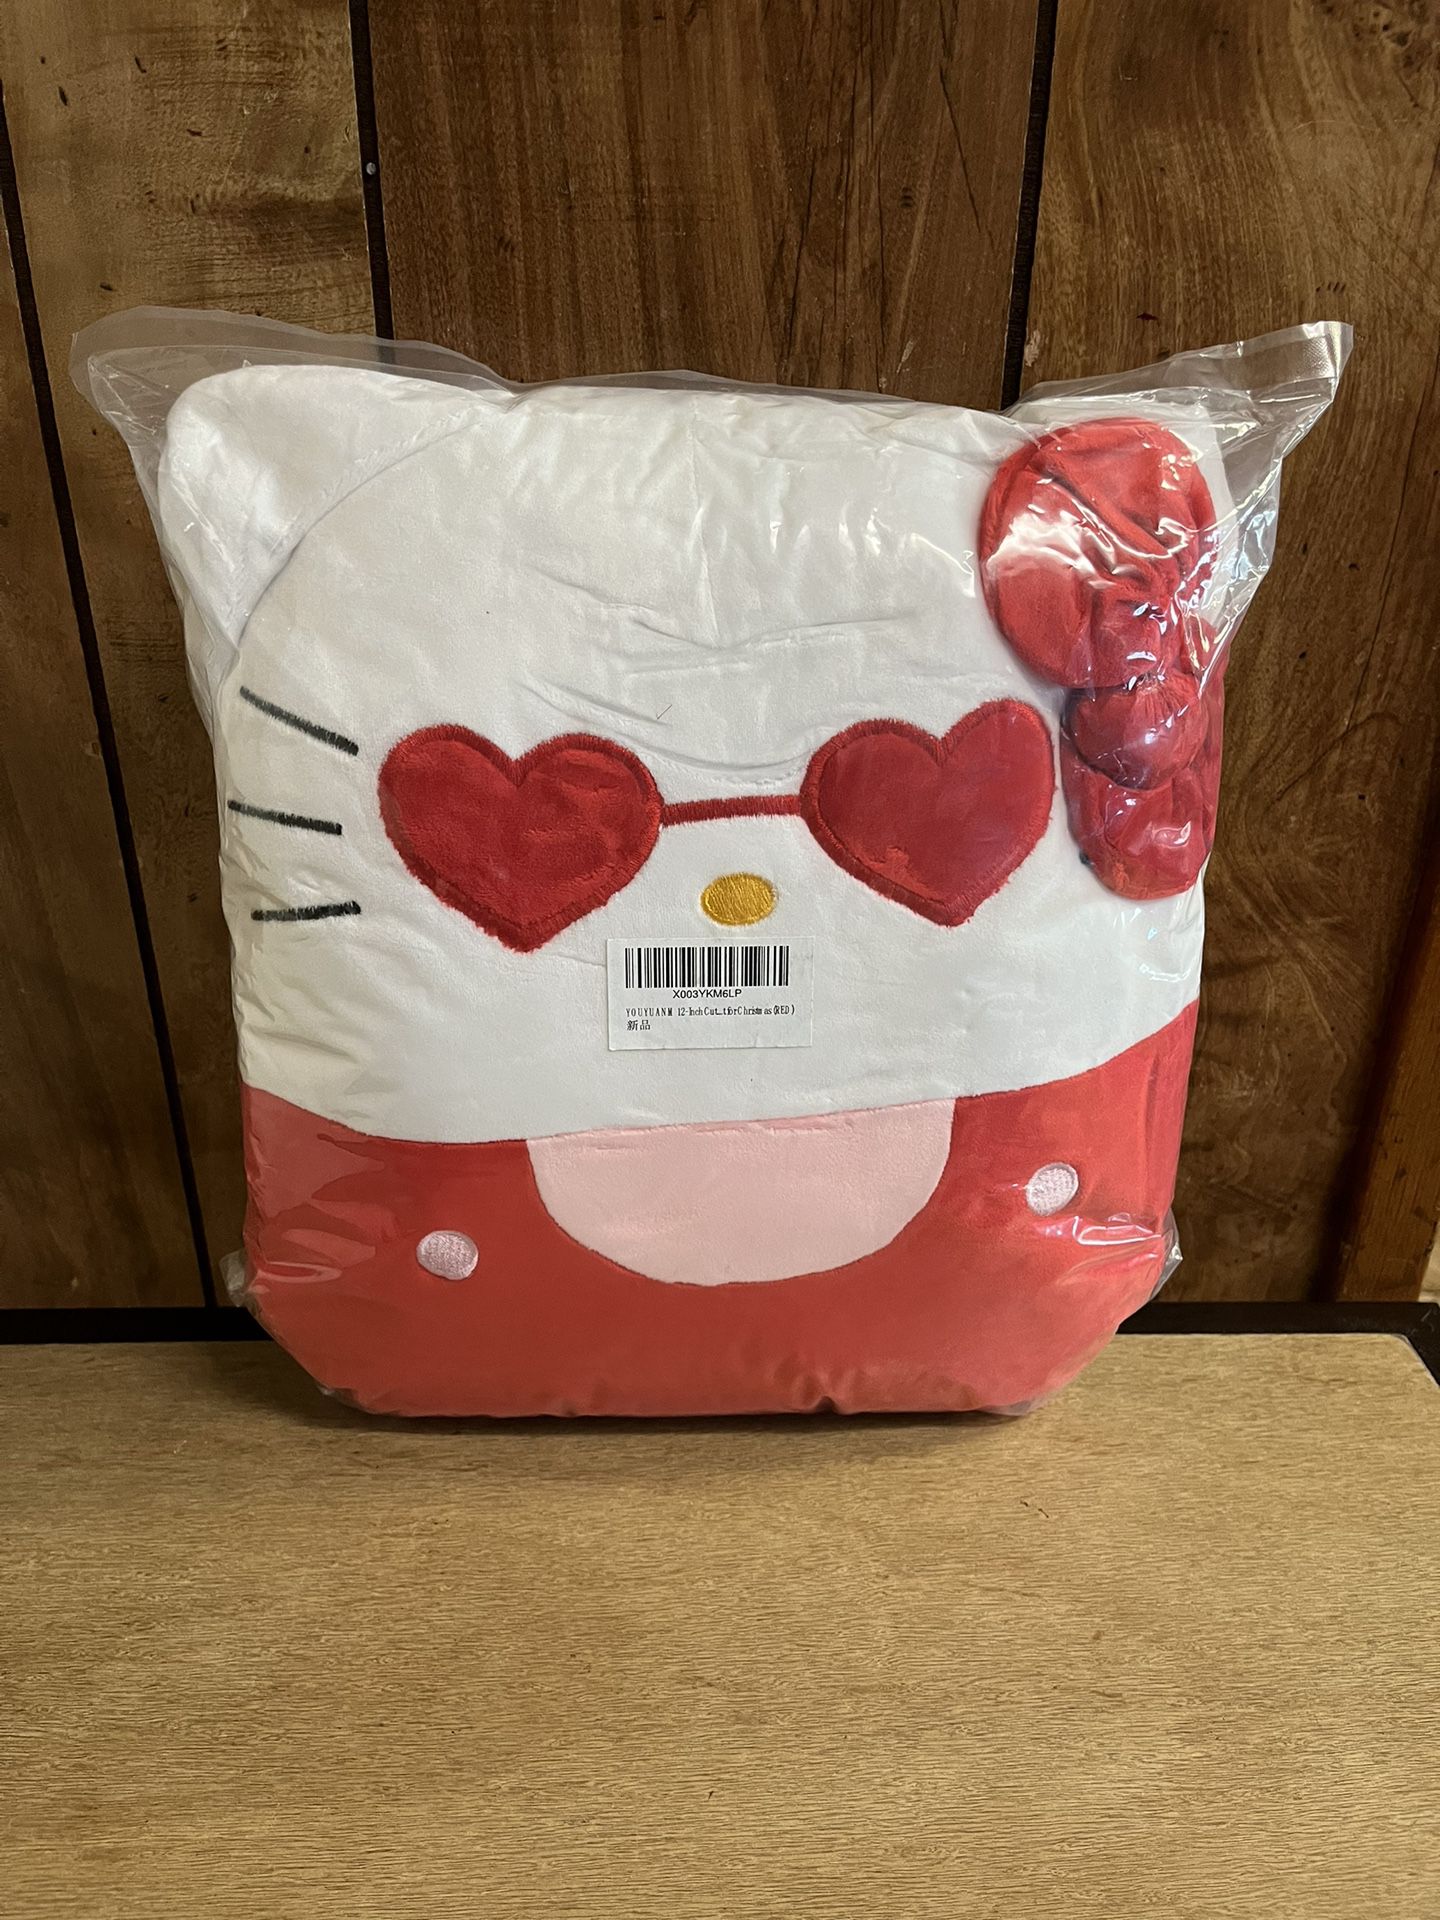 Brand New Hello Kitty with Red Glasses. 12in. Stuffed Animal 